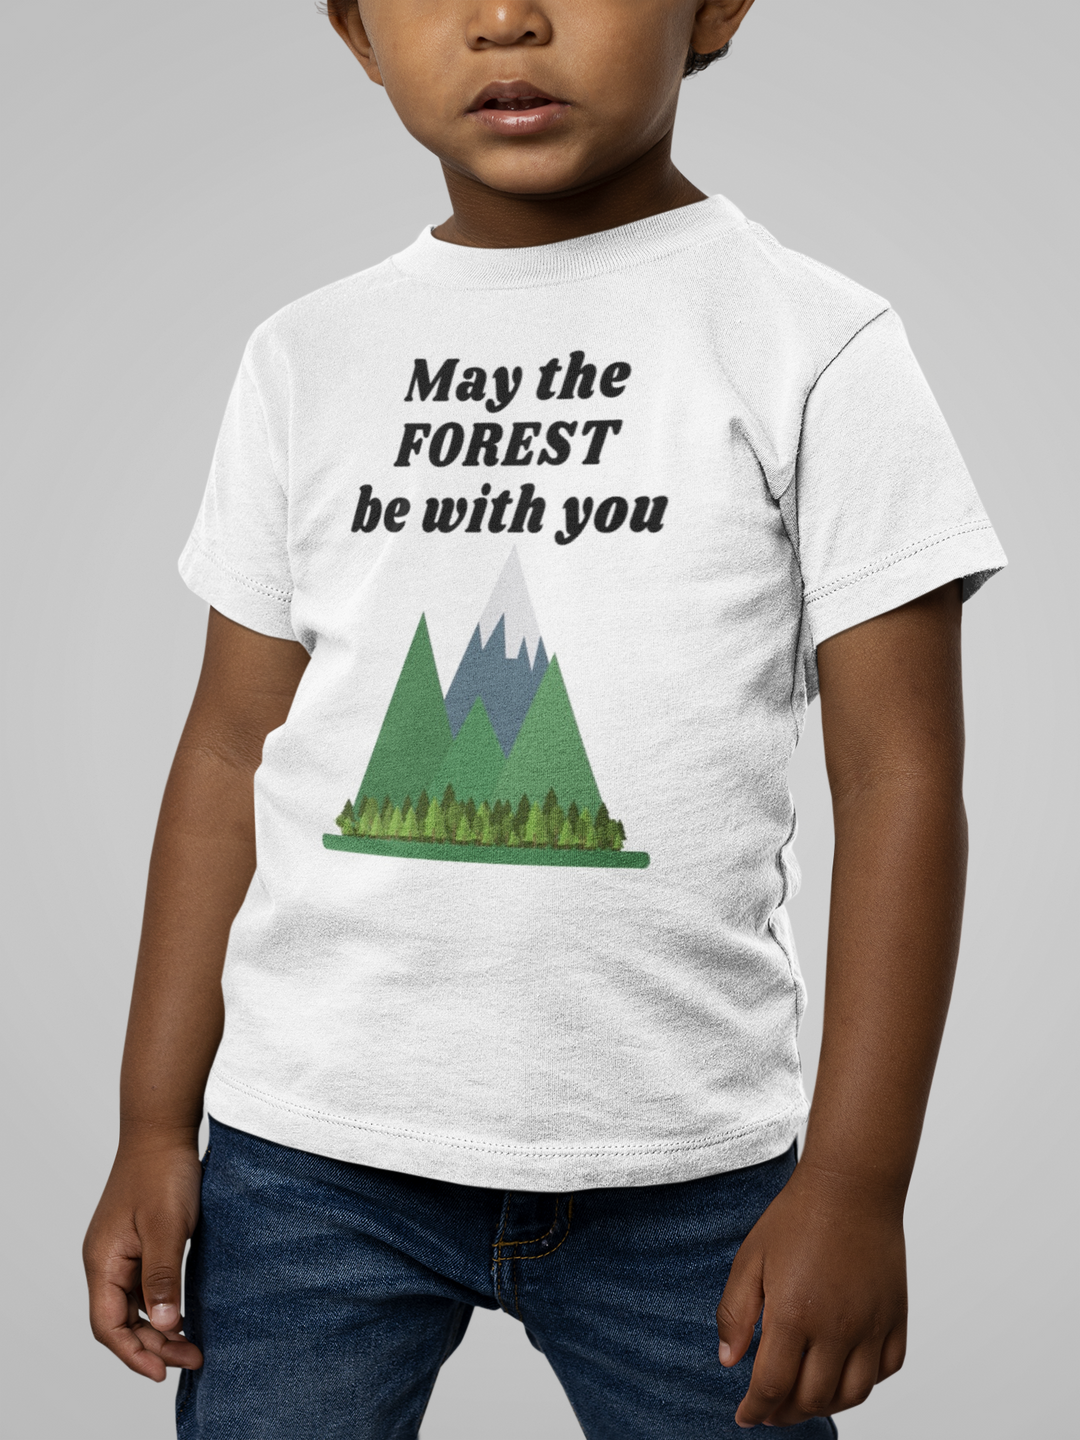 May The Forest Be With You. Short Sleeve T Shirt For Toddler And Kids. - TeesForToddlersandKids -  t-shirt - camping - may-the-forest-be-with-you-short-sleeve-t-shirt-for-toddler-and-kids